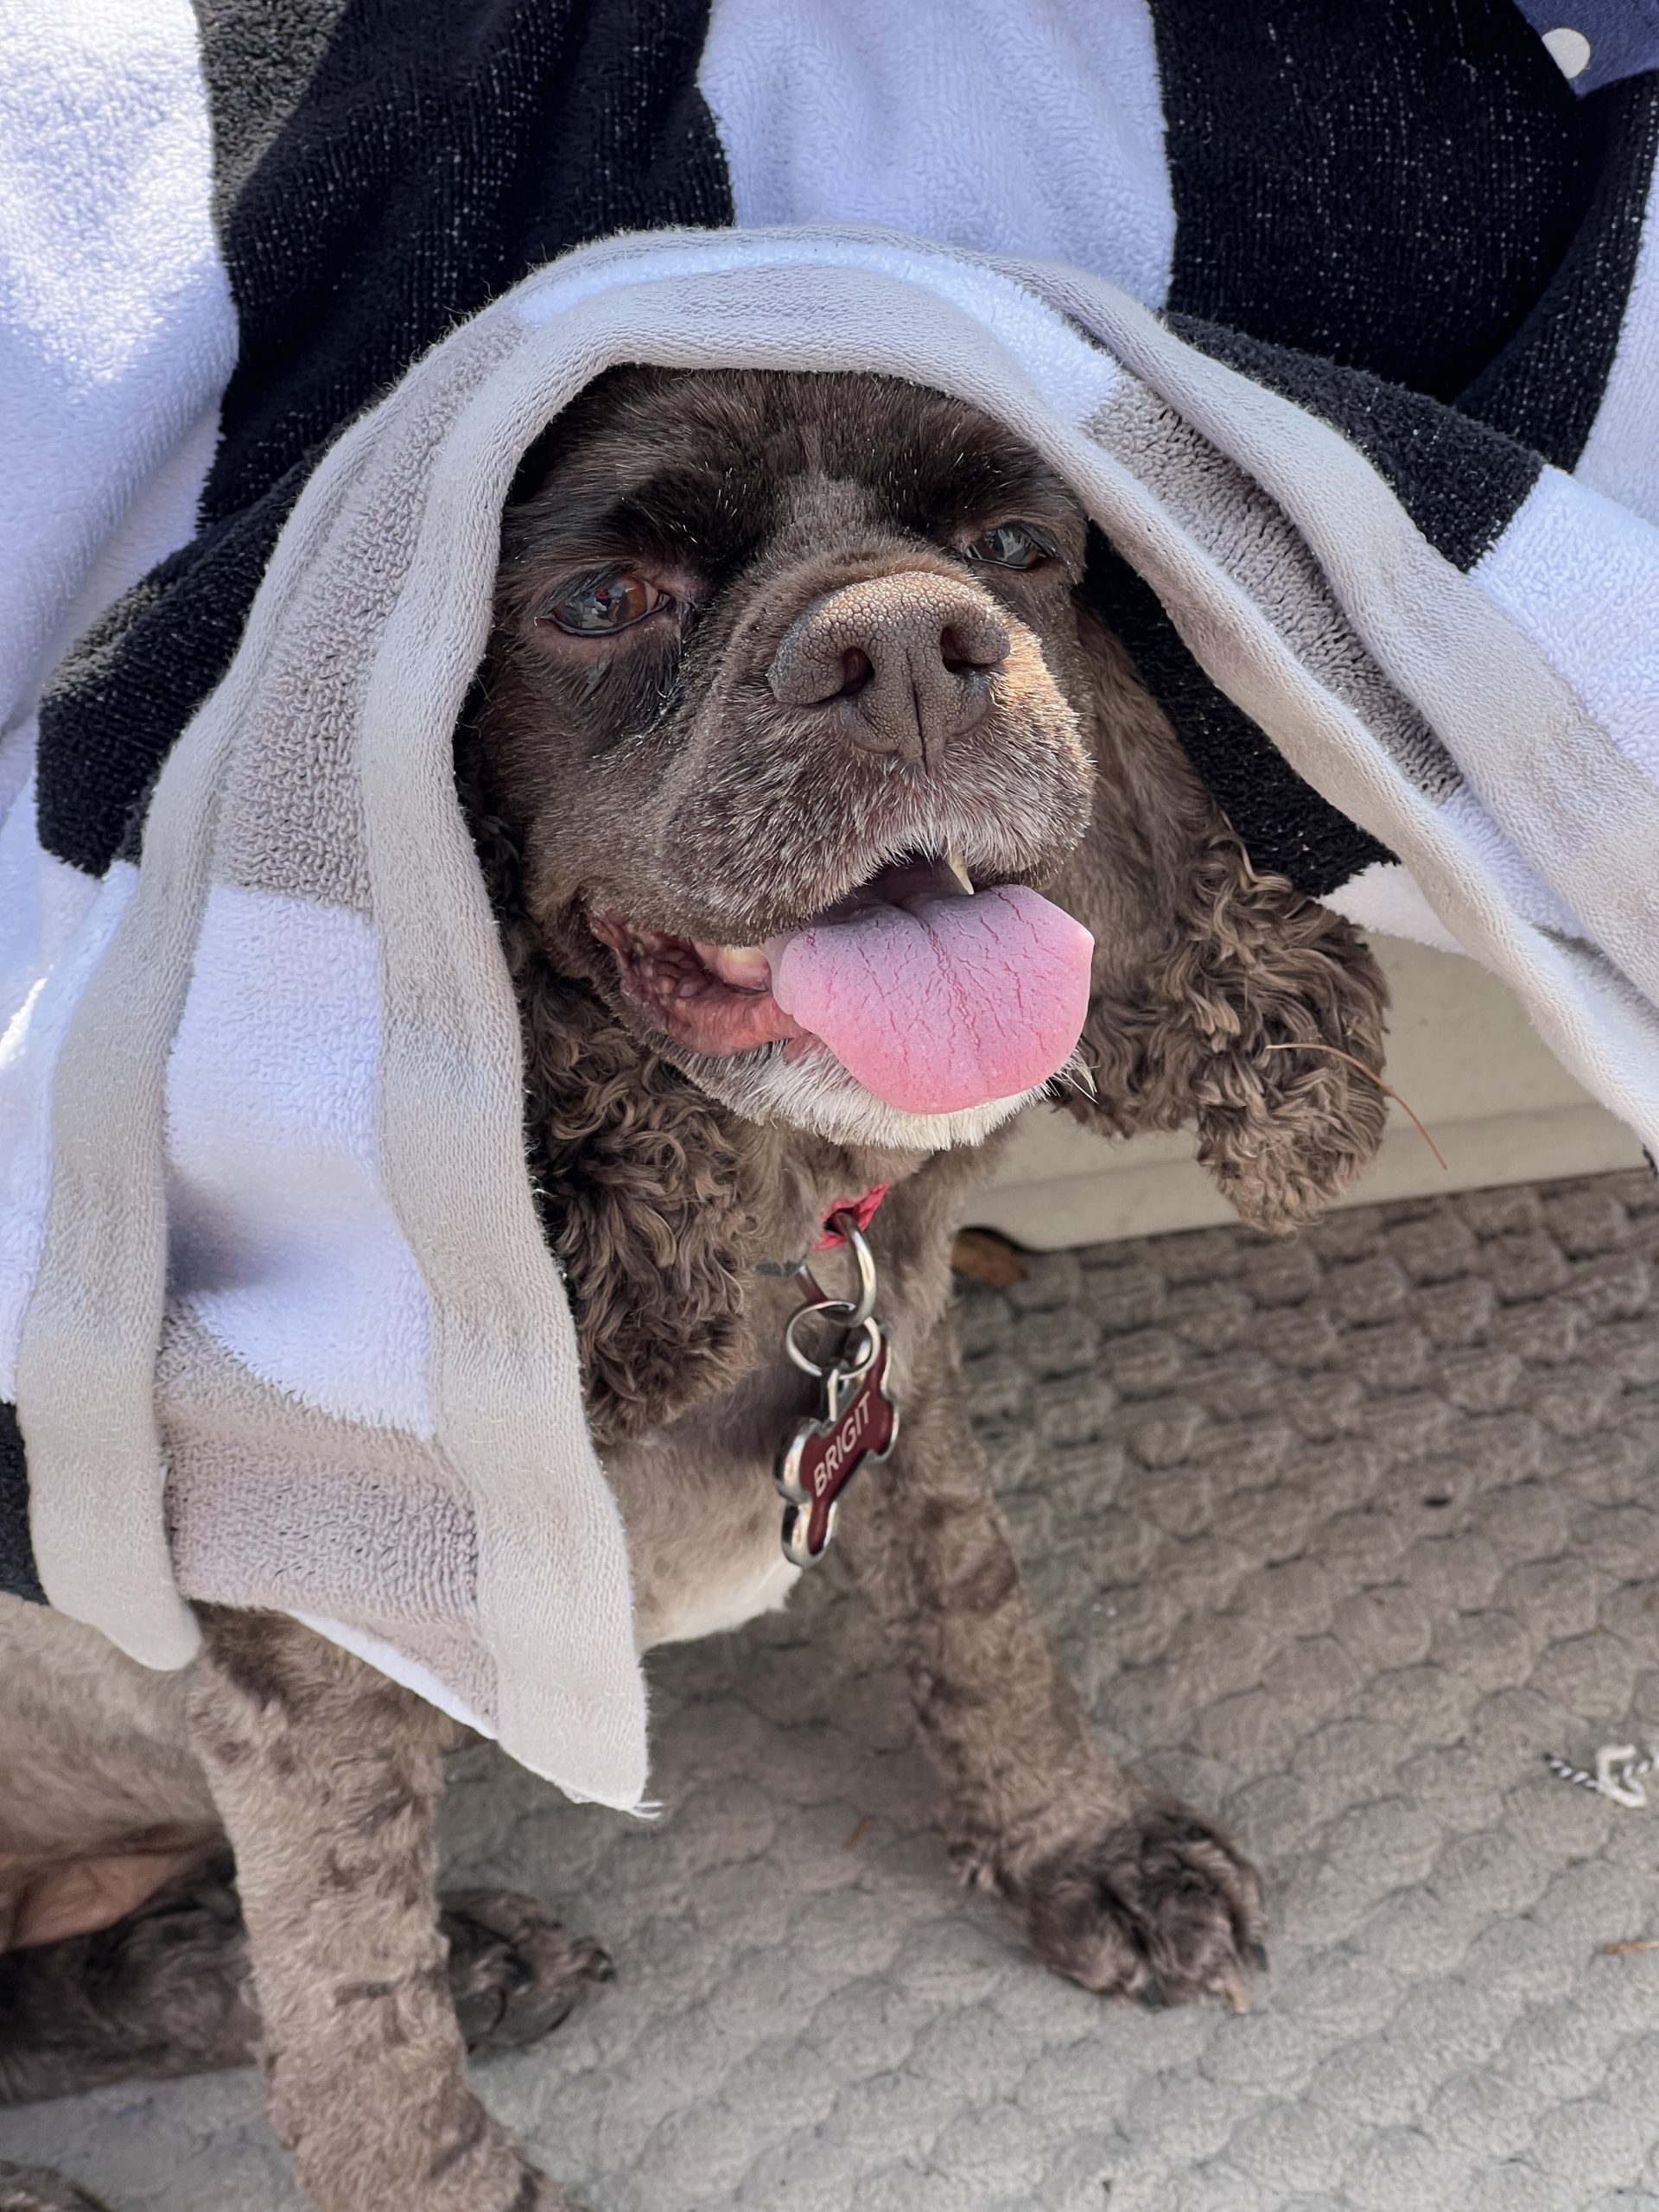 A photo of Brigit (a chocolate brown Cocker Spaniel) sticking her head out from under a towel.